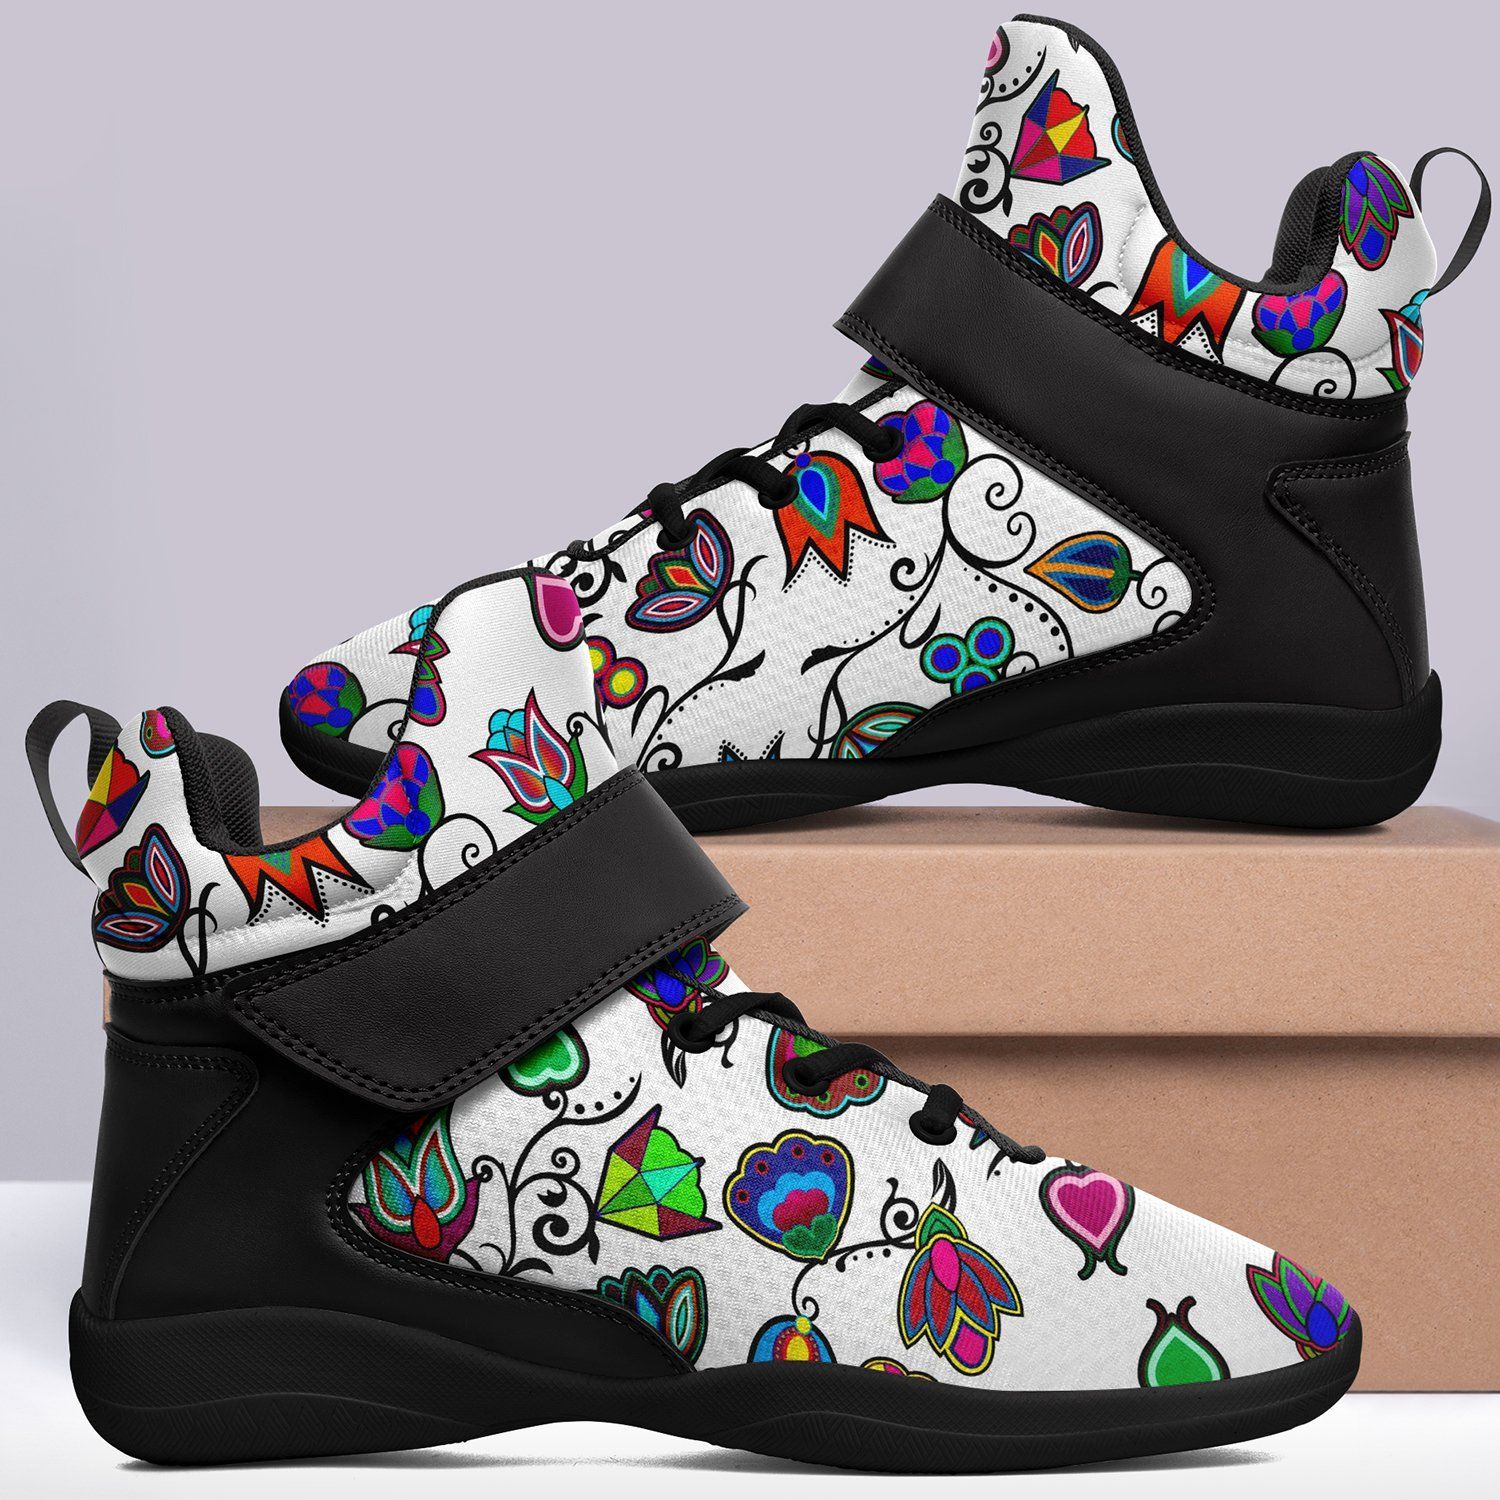 Indigenous Paisley White Ipottaa Basketball / Sport High Top Shoes - Black Sole 49 Dzine 